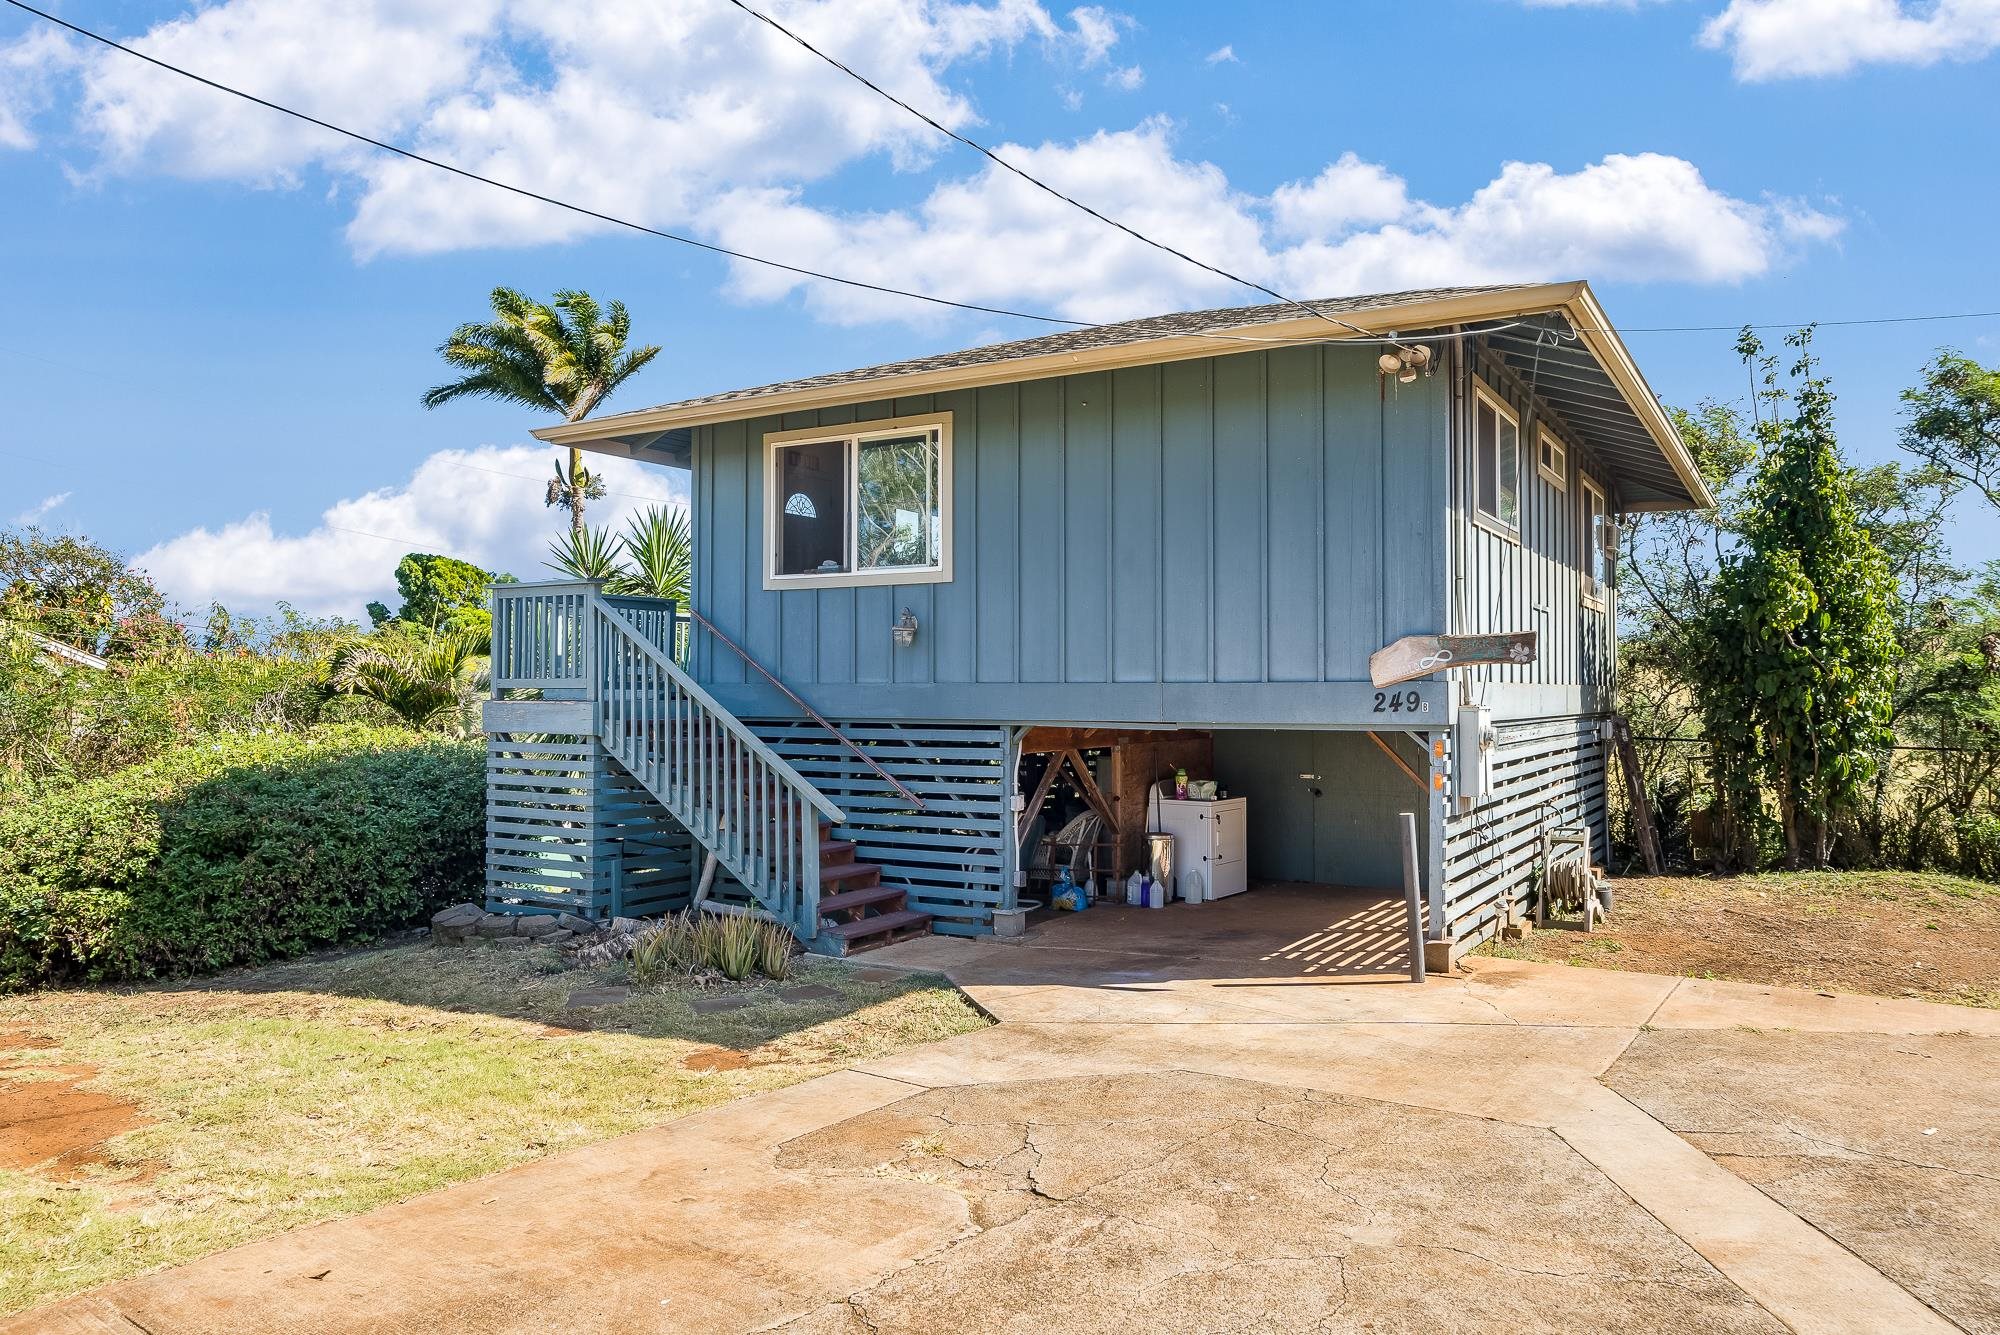 249  Baldwin Ave Paia Post Office, Spreckelsville/Paia/Kuau home - photo 2 of 20